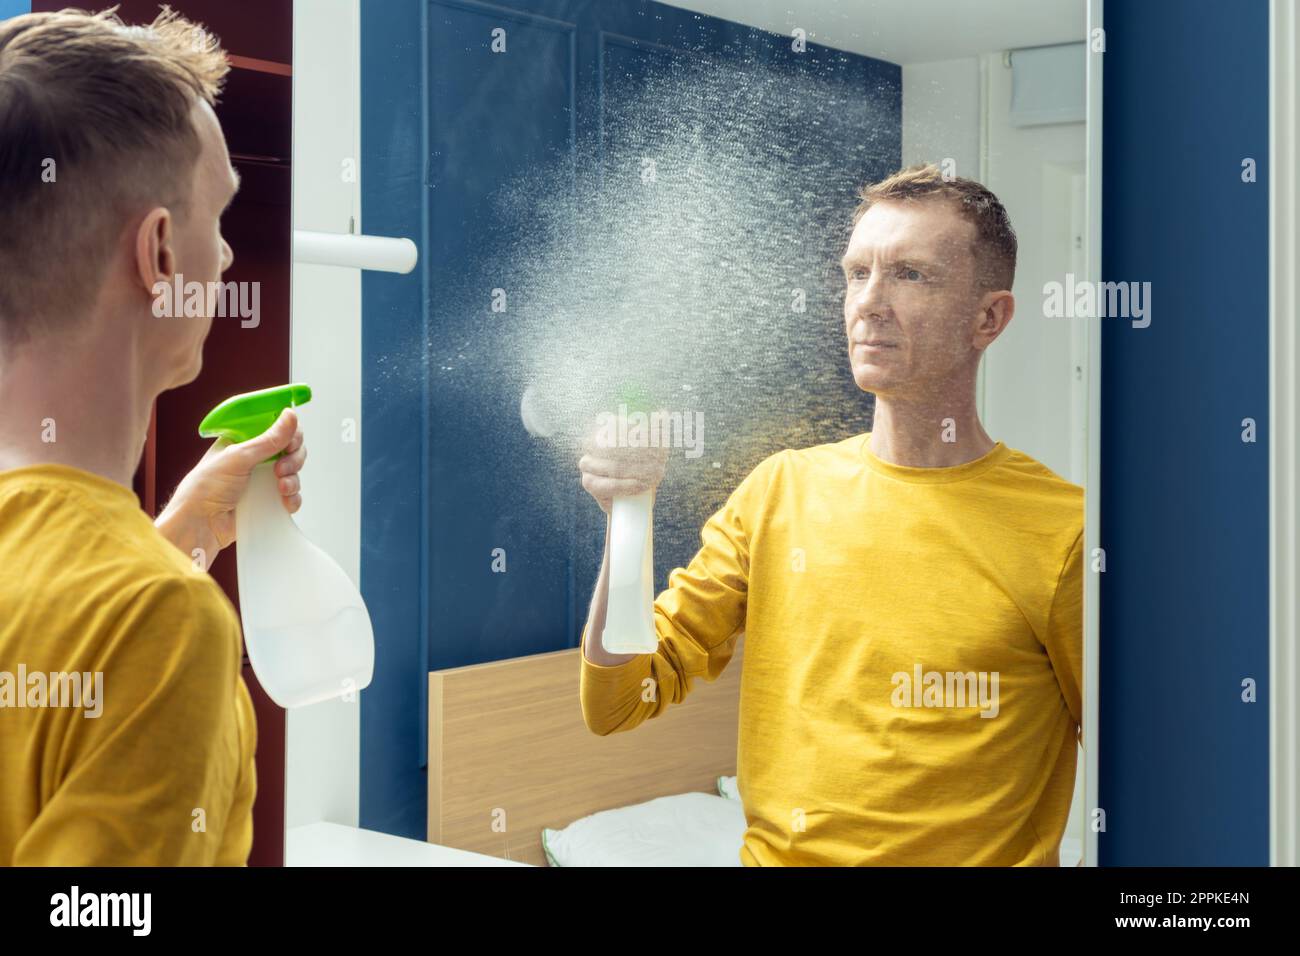 Adult man hold bottle of cleanser and spray splashes on mirror of sliding wardrobe door. Wash mirror with cleaners. Stock Photo